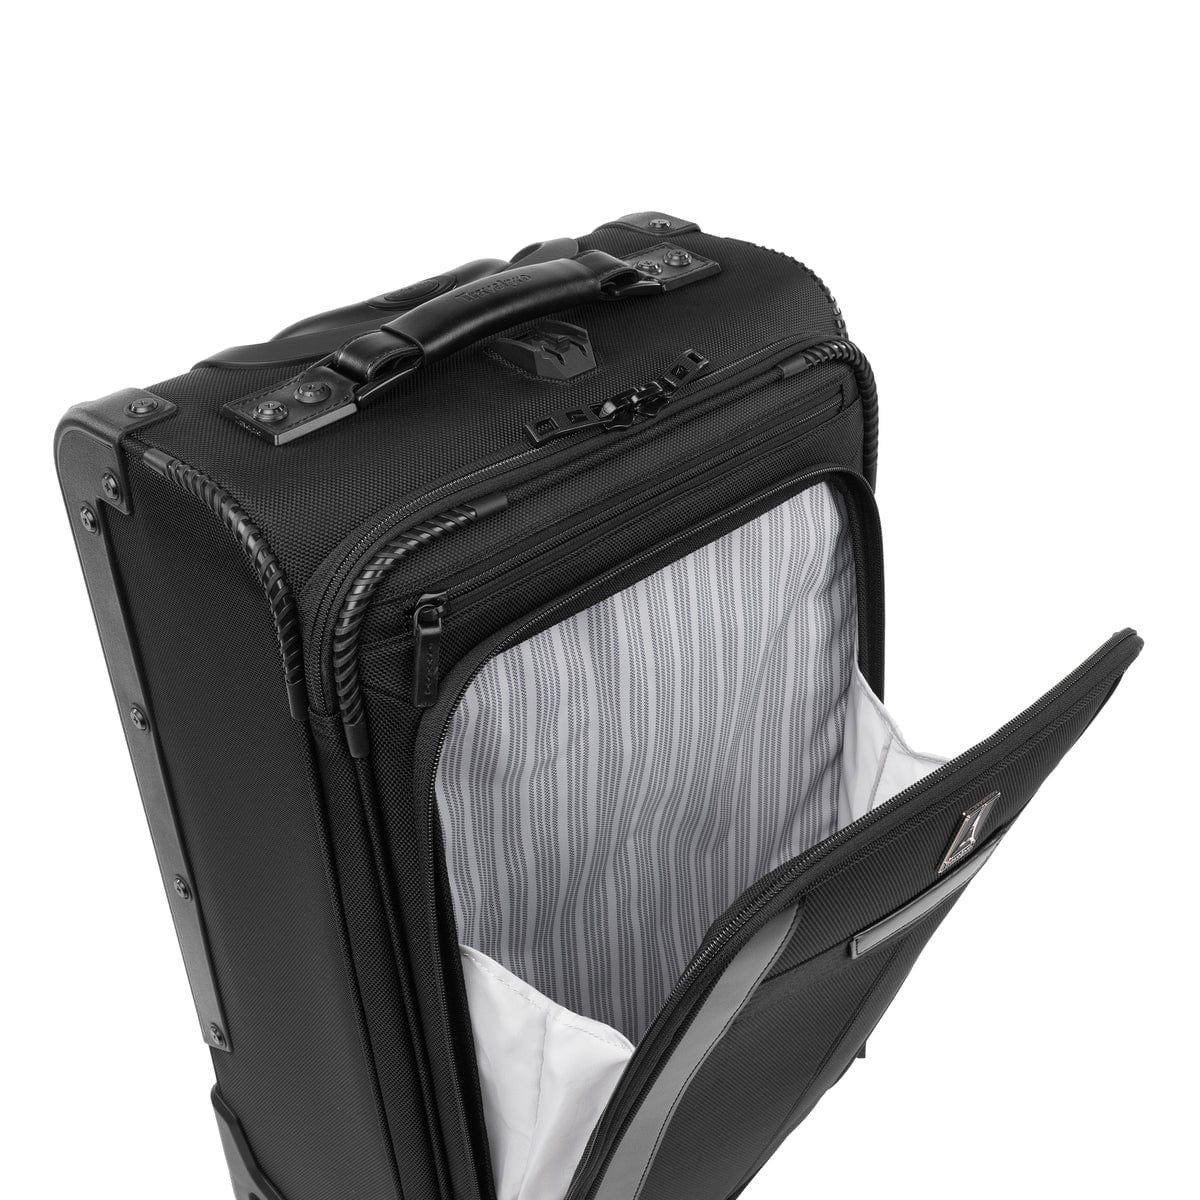 Travelpro Seven3 Carry-on Rollaboard® (no side pockets/expansion)